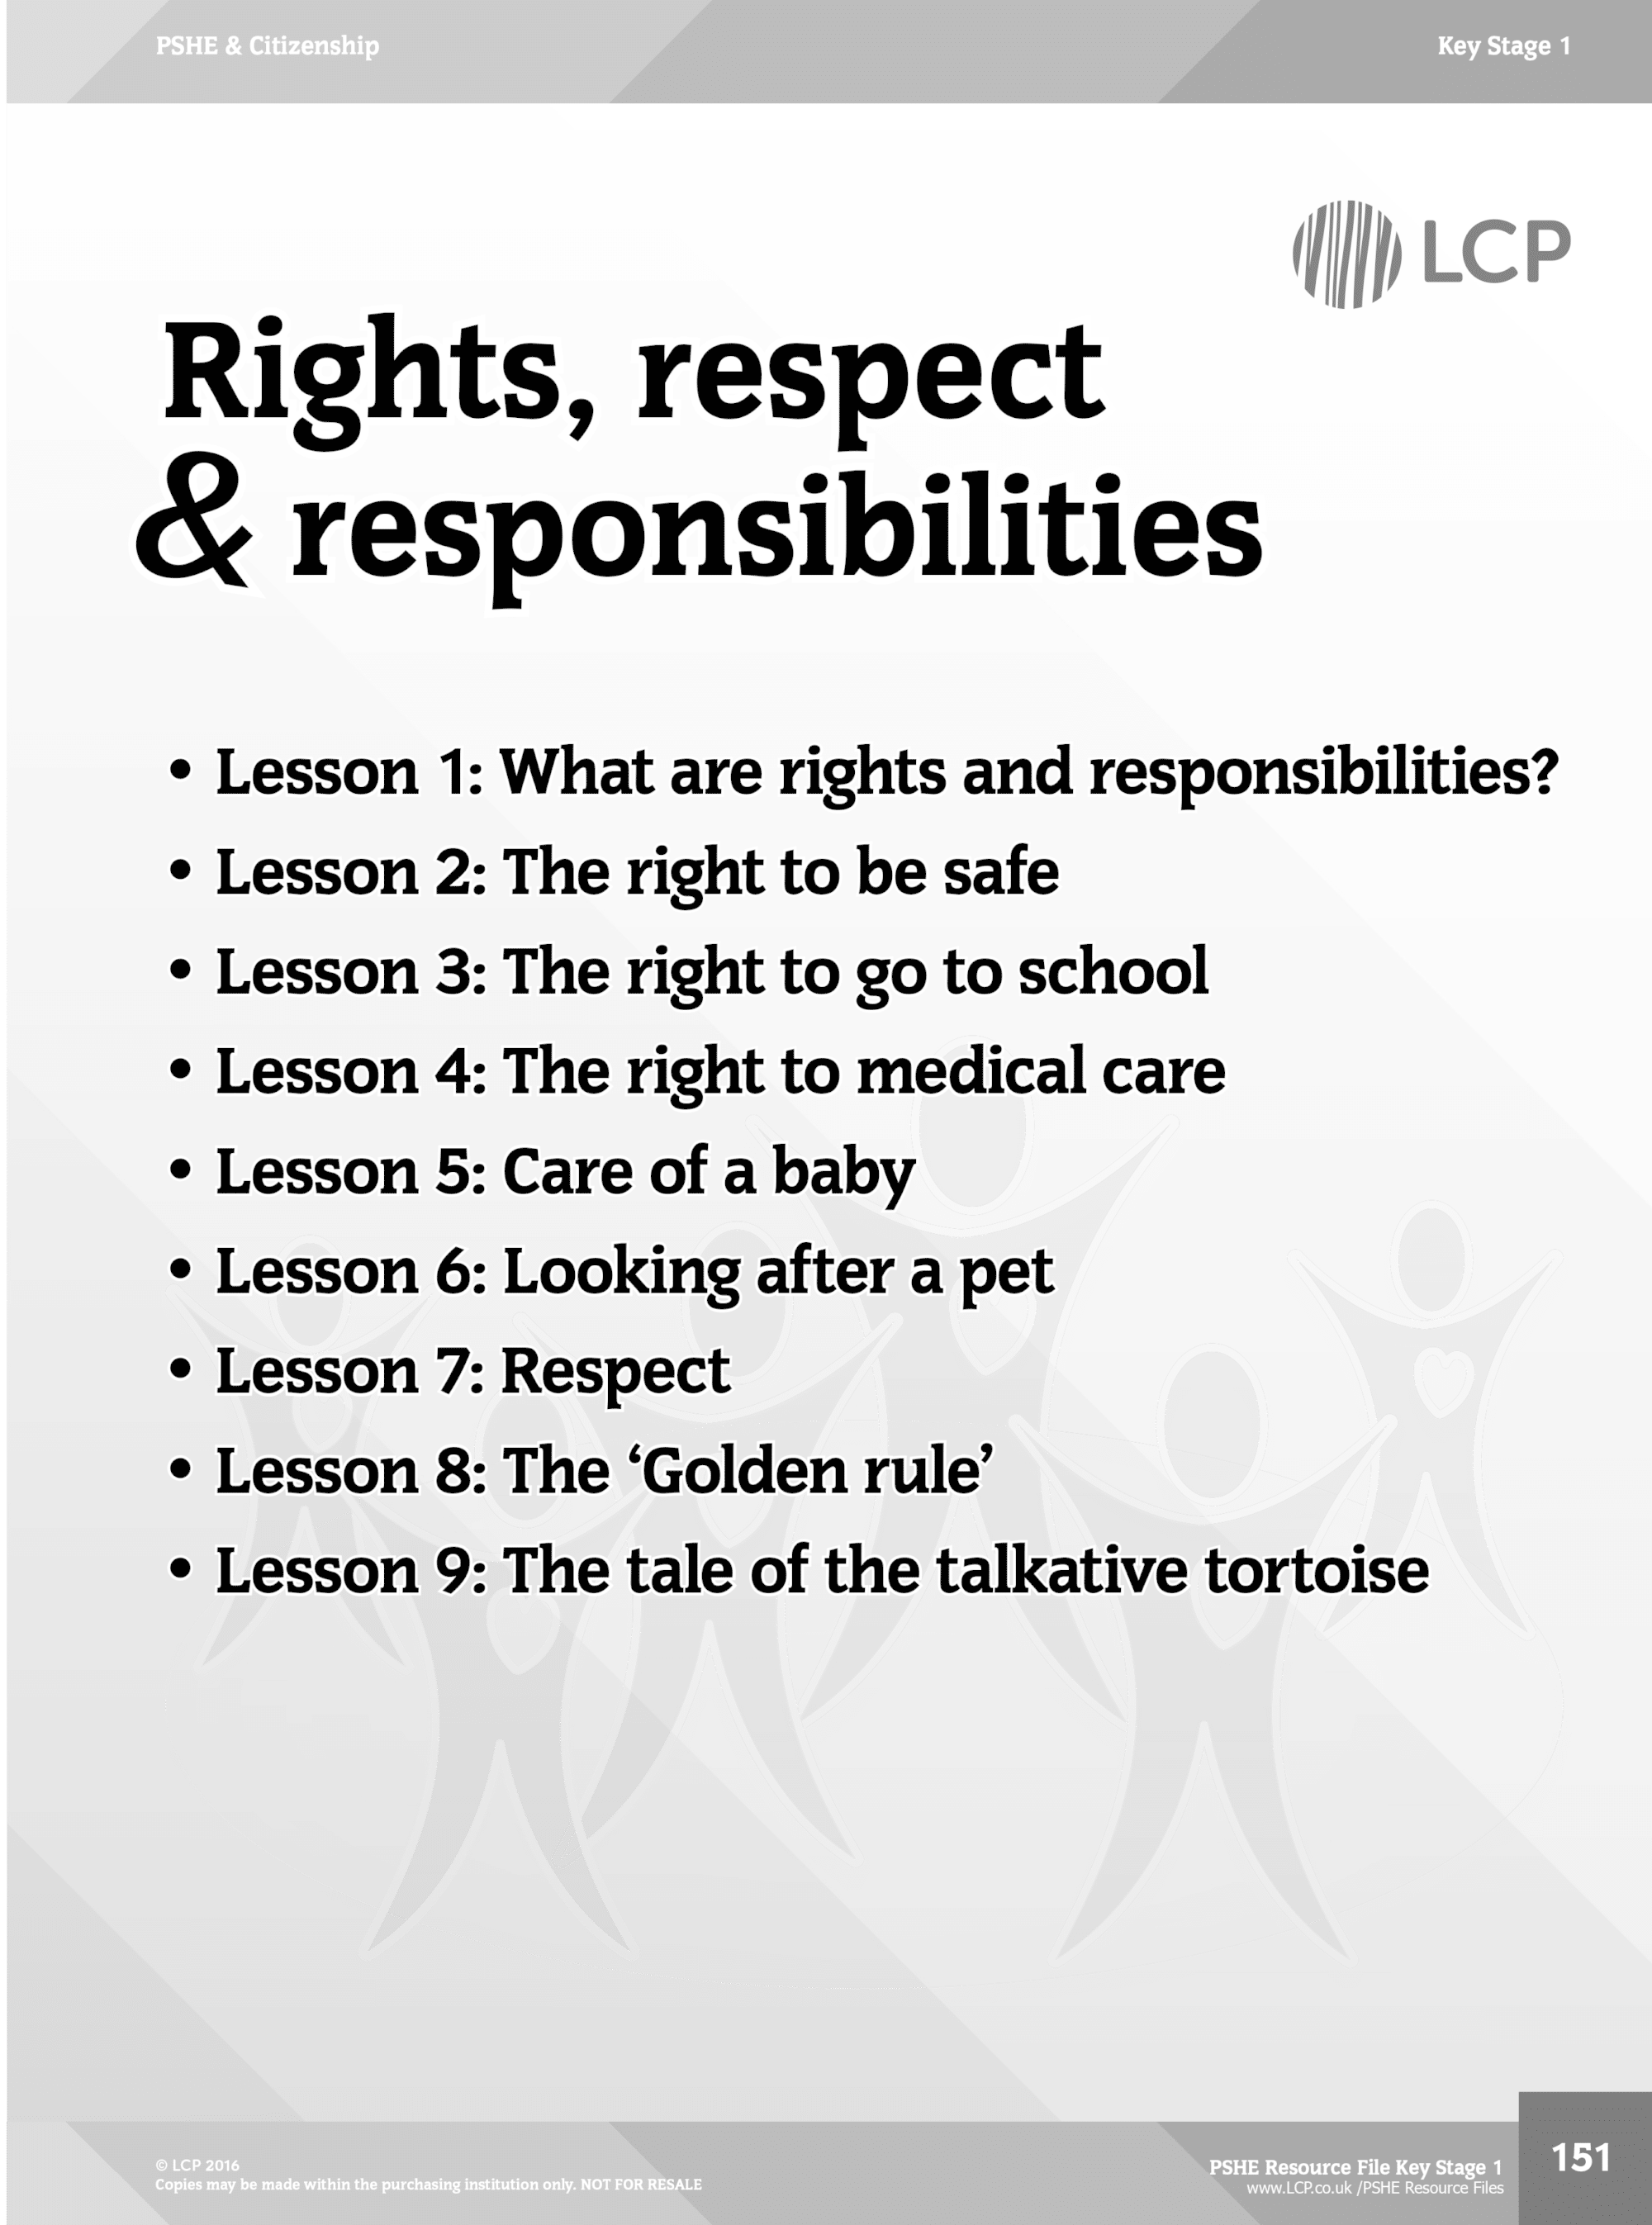 Responsibilities respect rights What are